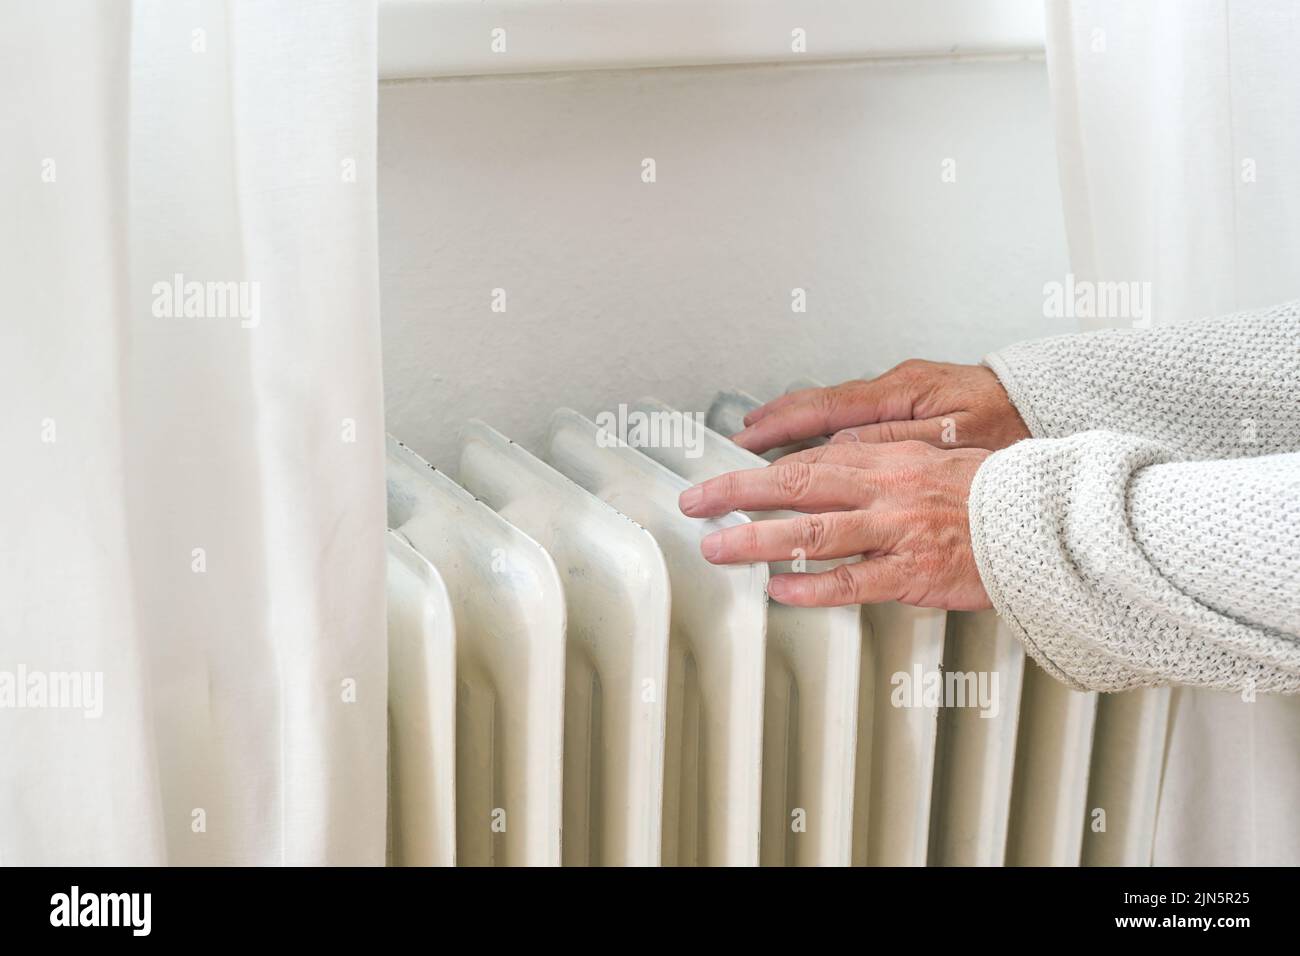 Hands of an elderly woman in woolen clothes feeling low temperature on an old heater, suffering from inflation and rising energy prices, copy space, s Stock Photo